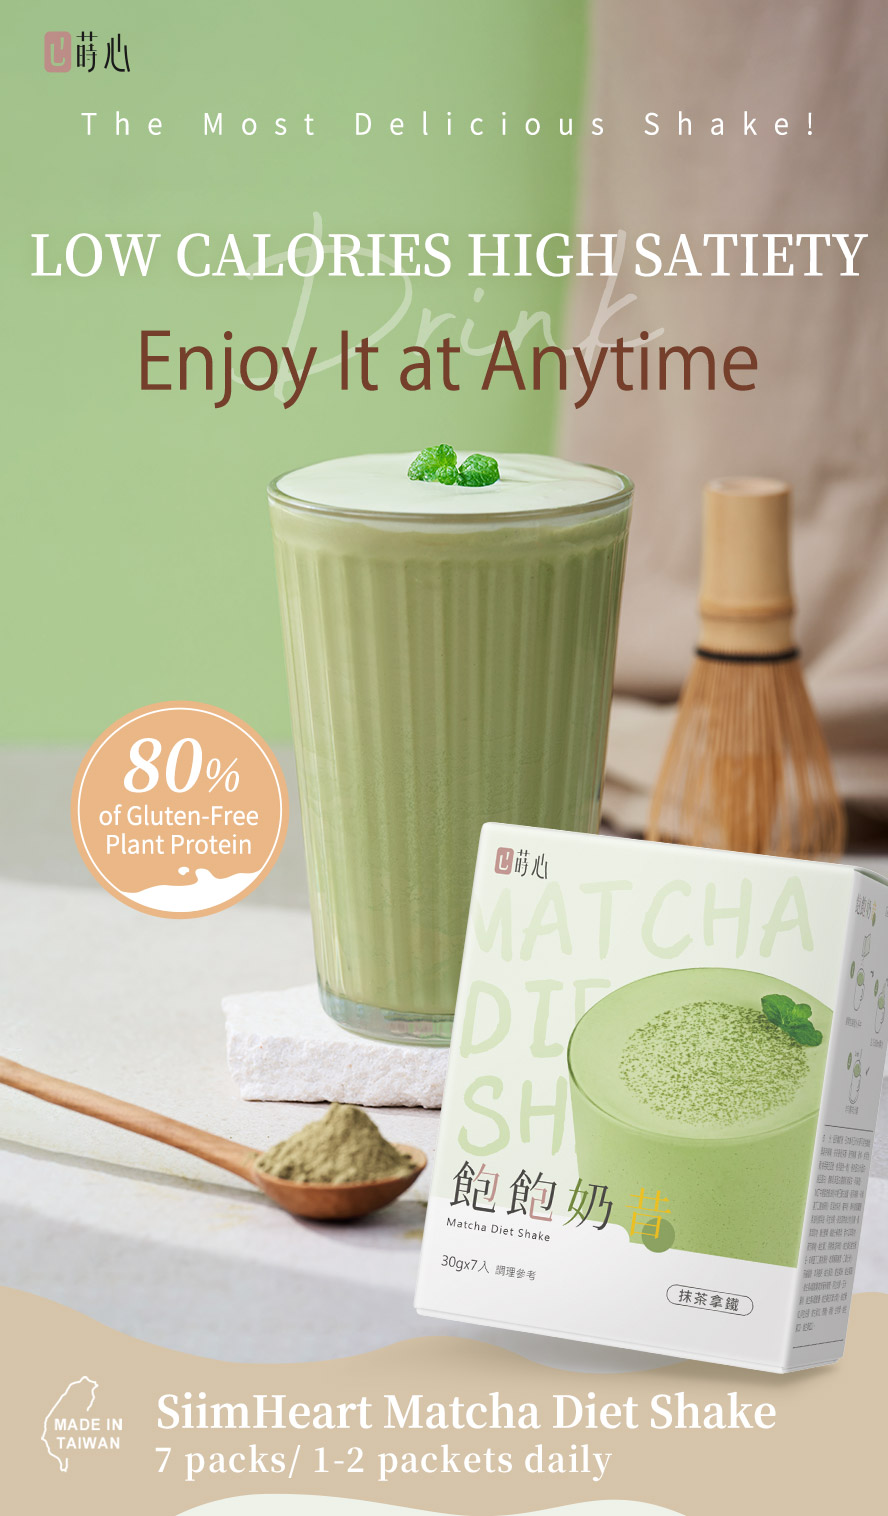 Matcha Diet Shake has 80% of gluten-free plant protein & rich black tea flavour with the less calories but more enjoyment even during diet!